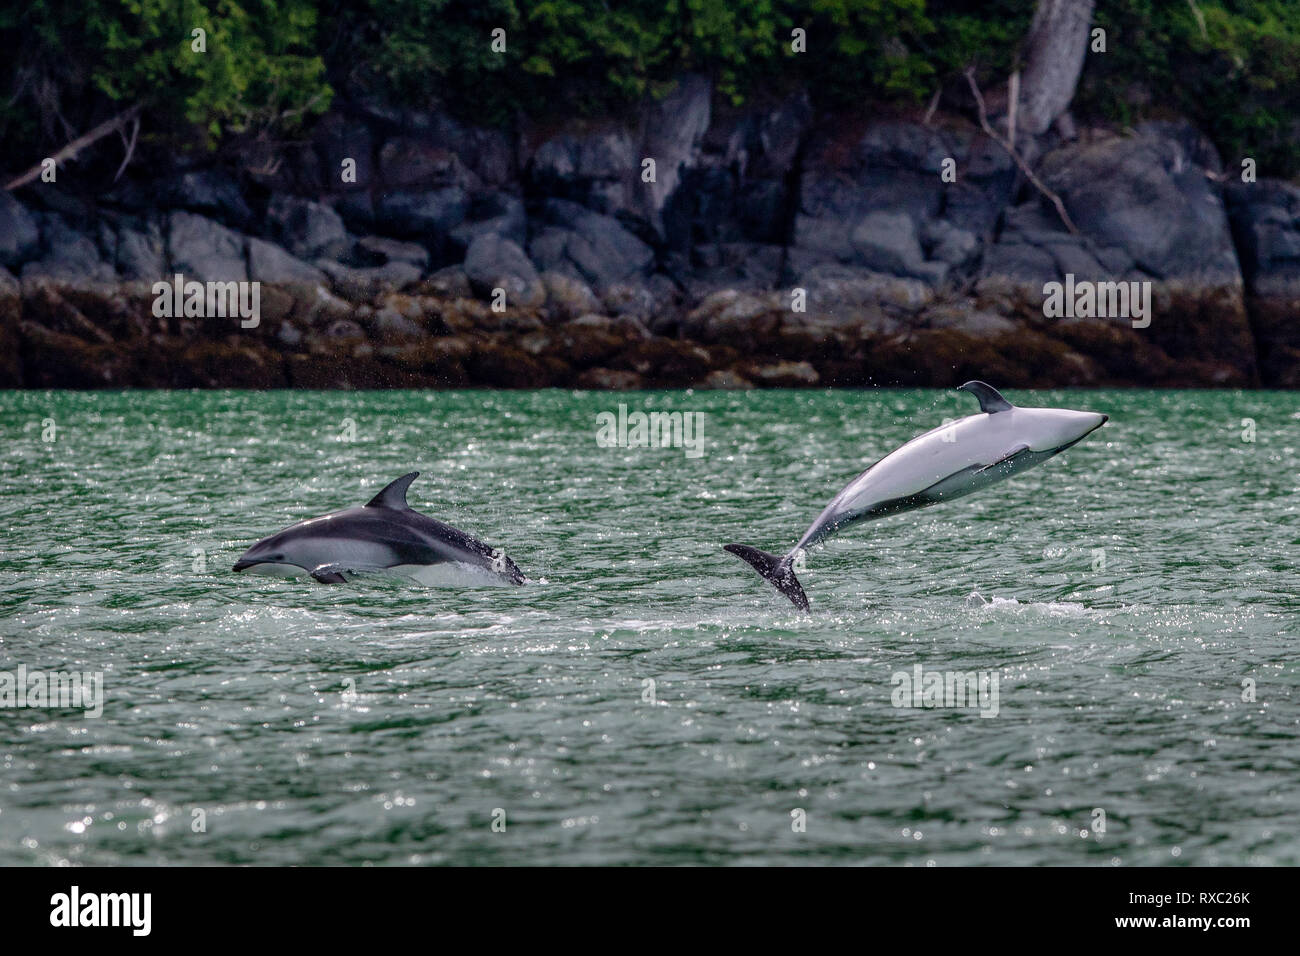 2 pacific white sided dolphins jumping close to shore in Knight Inlet, First Nations Territory, British Columbia, Canada. Stock Photo